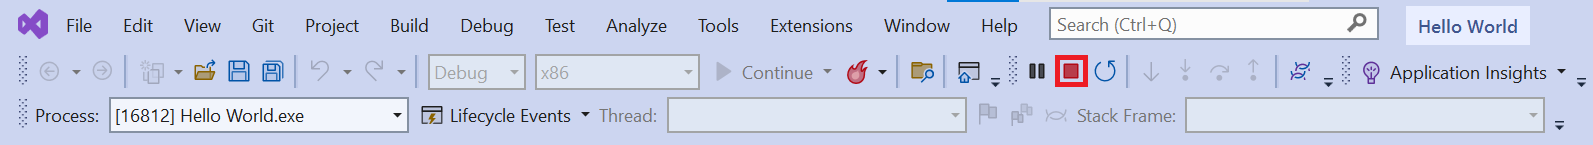 Screenshot showing the Visual Studio menu bar. The stop button, represented by a red square, is highlighted.